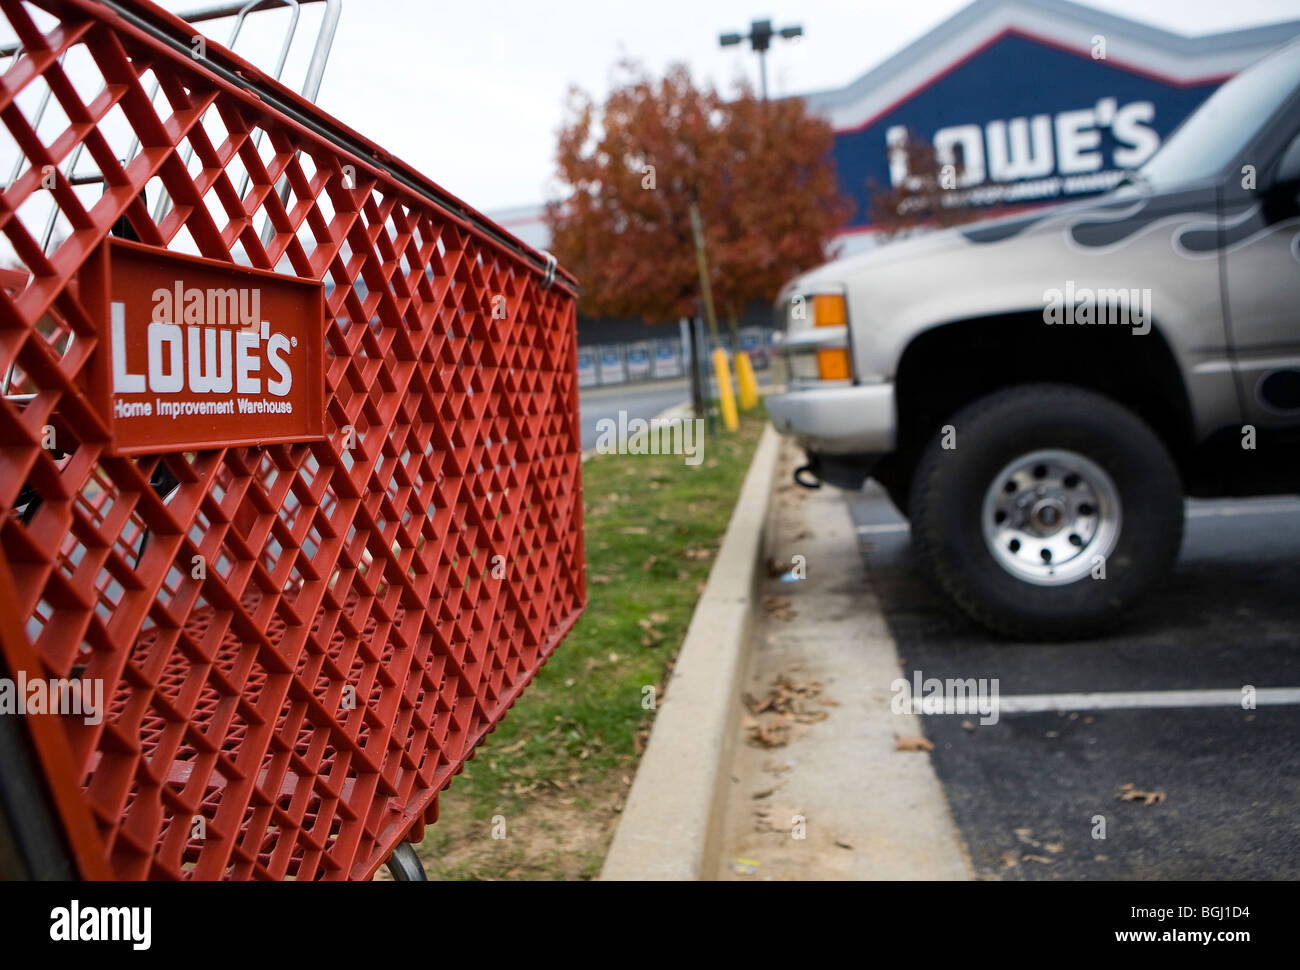 A Lowes home improvement retail store.  Stock Photo